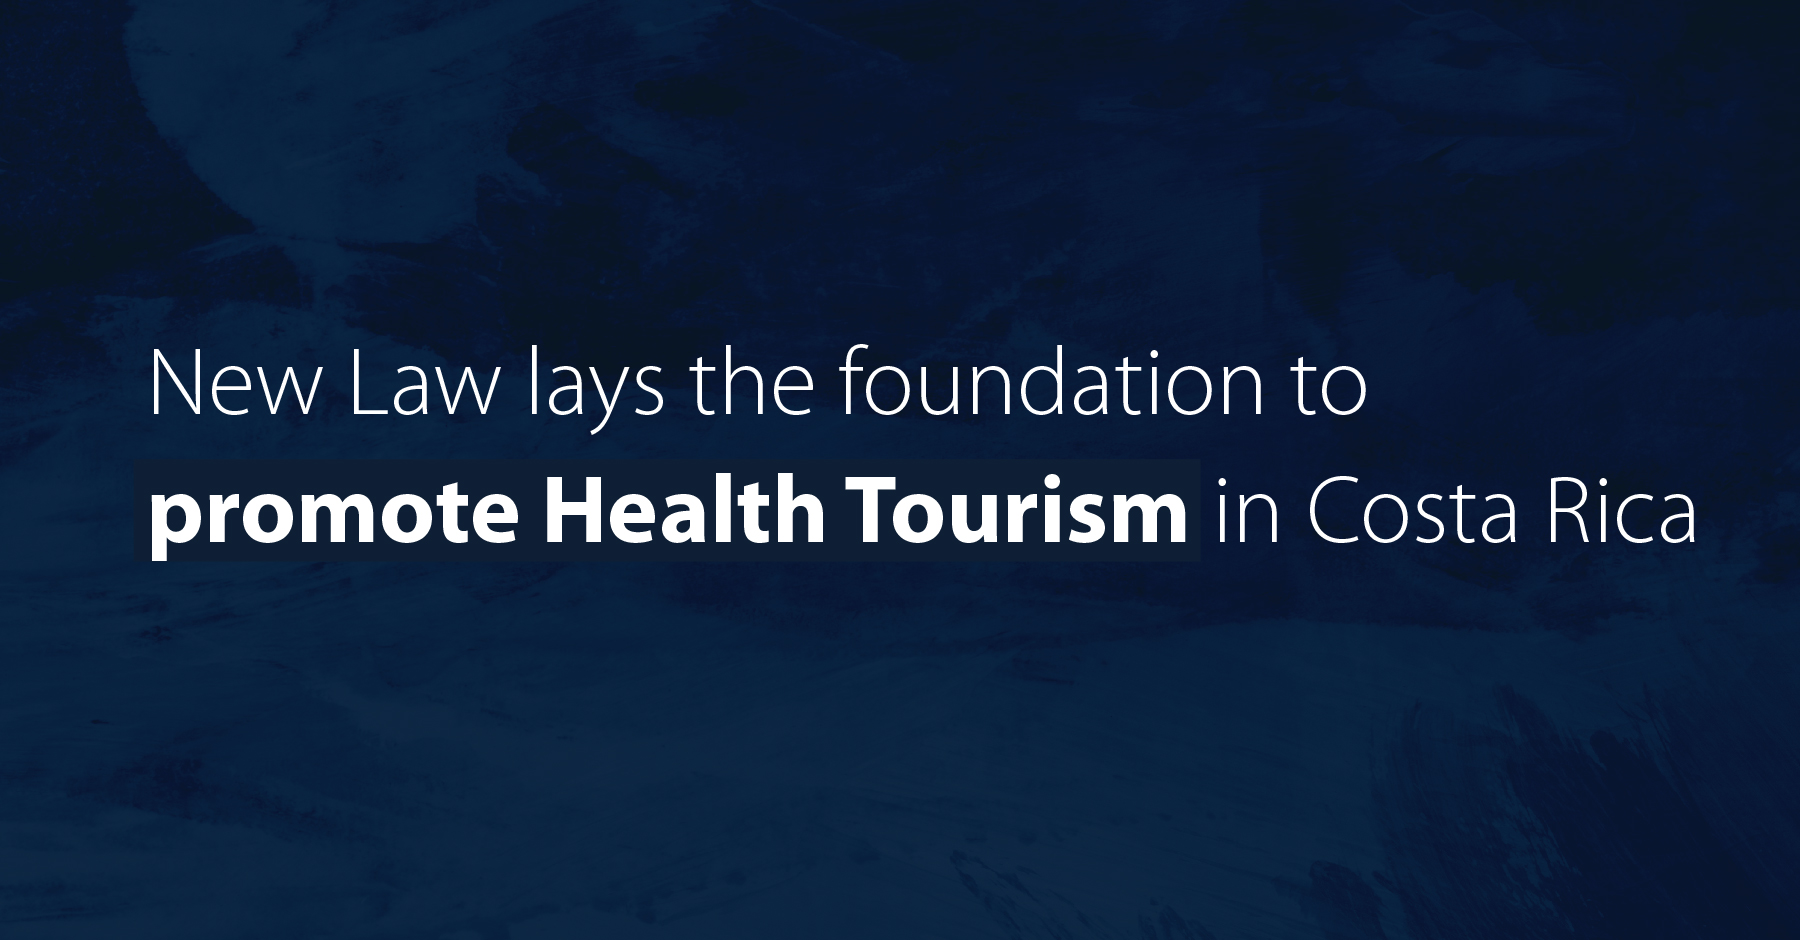 New Law lays the foundation to promote Health Tourism in Costa Rica 